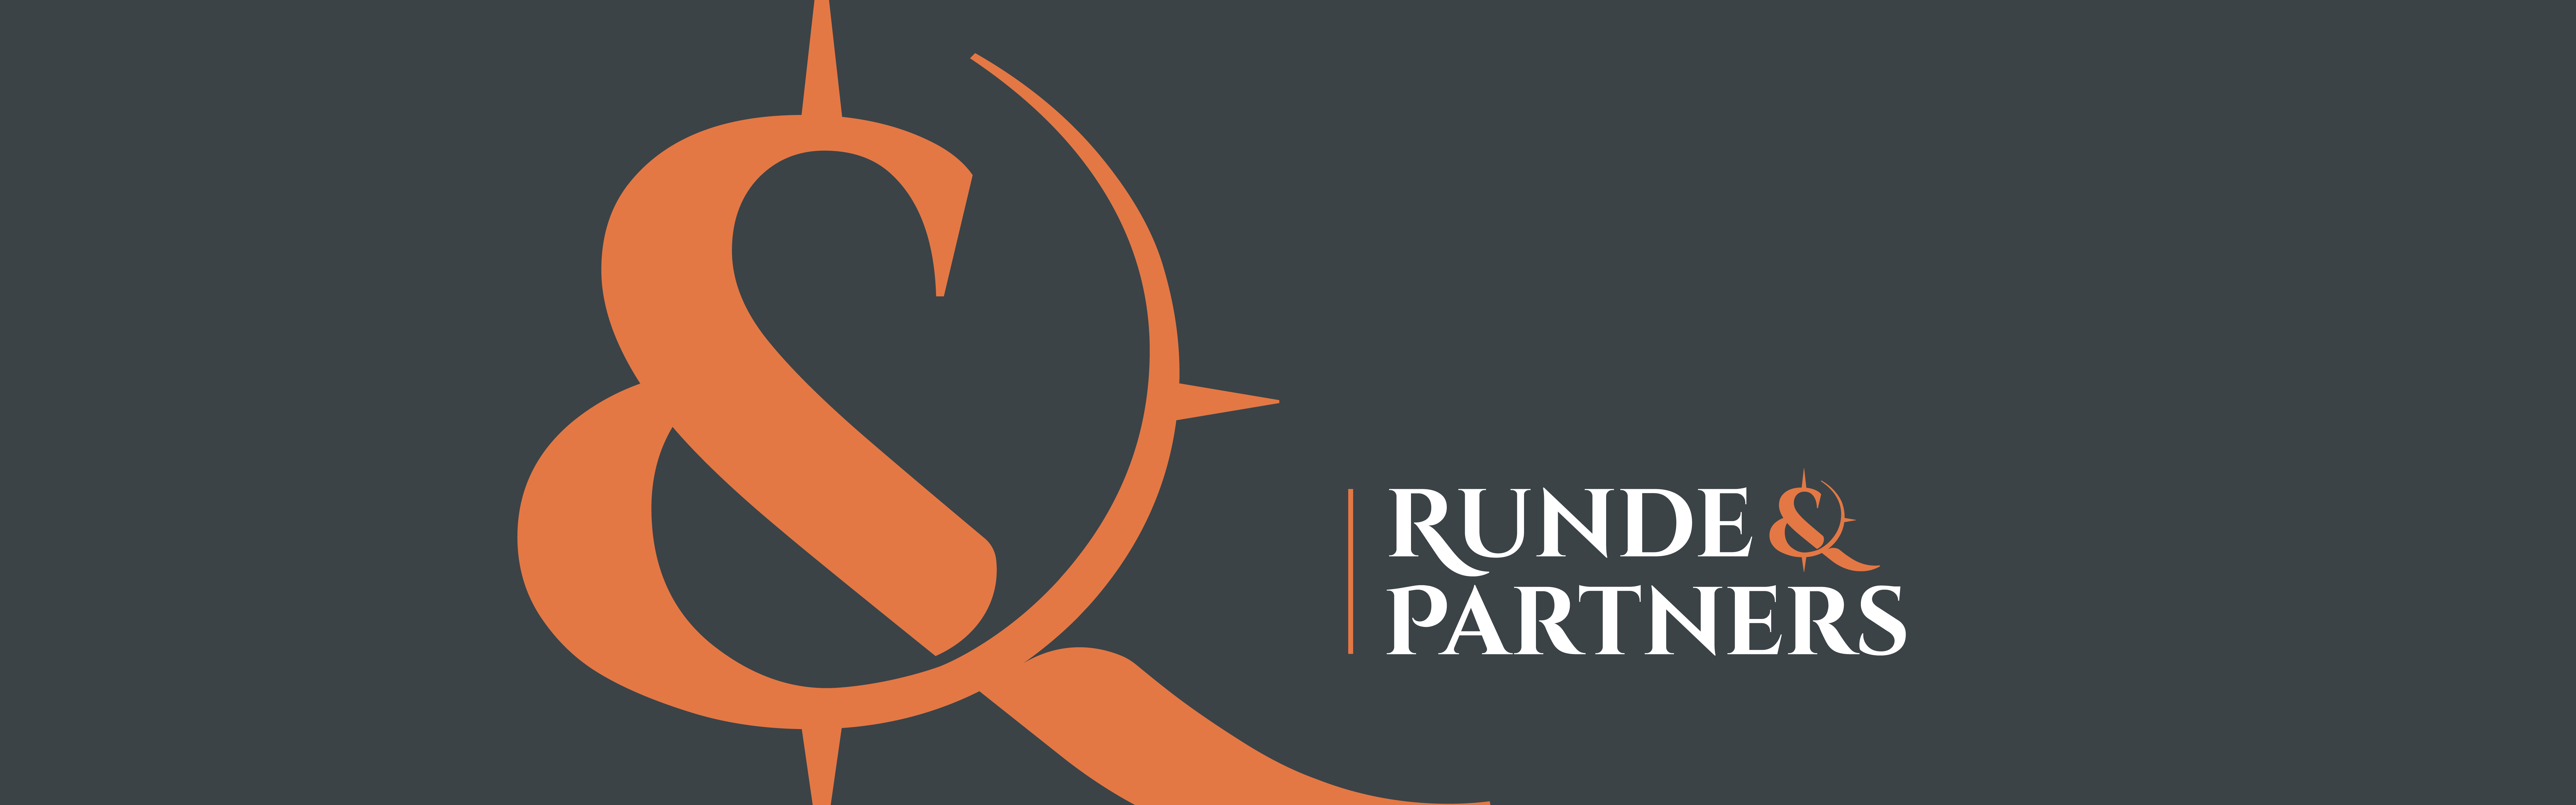 This image showcases a graphical orange ampersand symbol with a stylized appearance positioned prominently on a dark gray background. To the right of the symbol, there is the text "Runde & Partners.